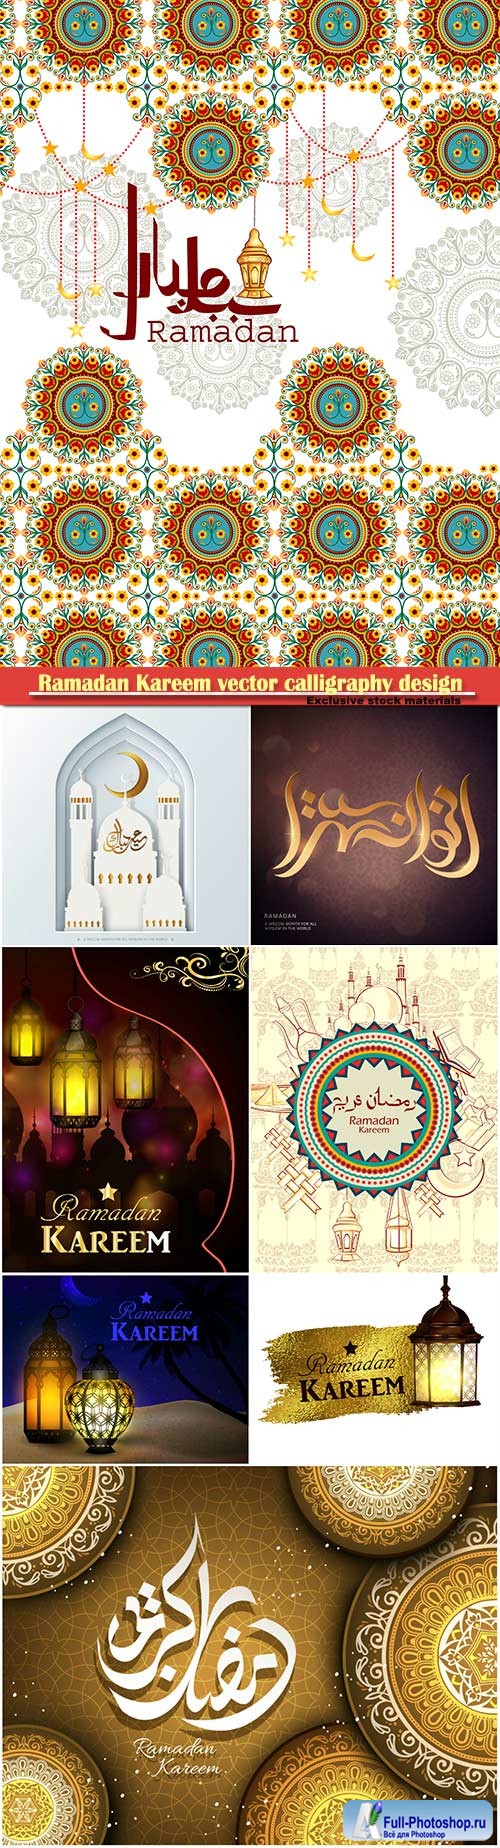 Ramadan Kareem vector calligraphy design with decorative floral pattern,mosque silhouette, crescent and glittering islamic background # 18